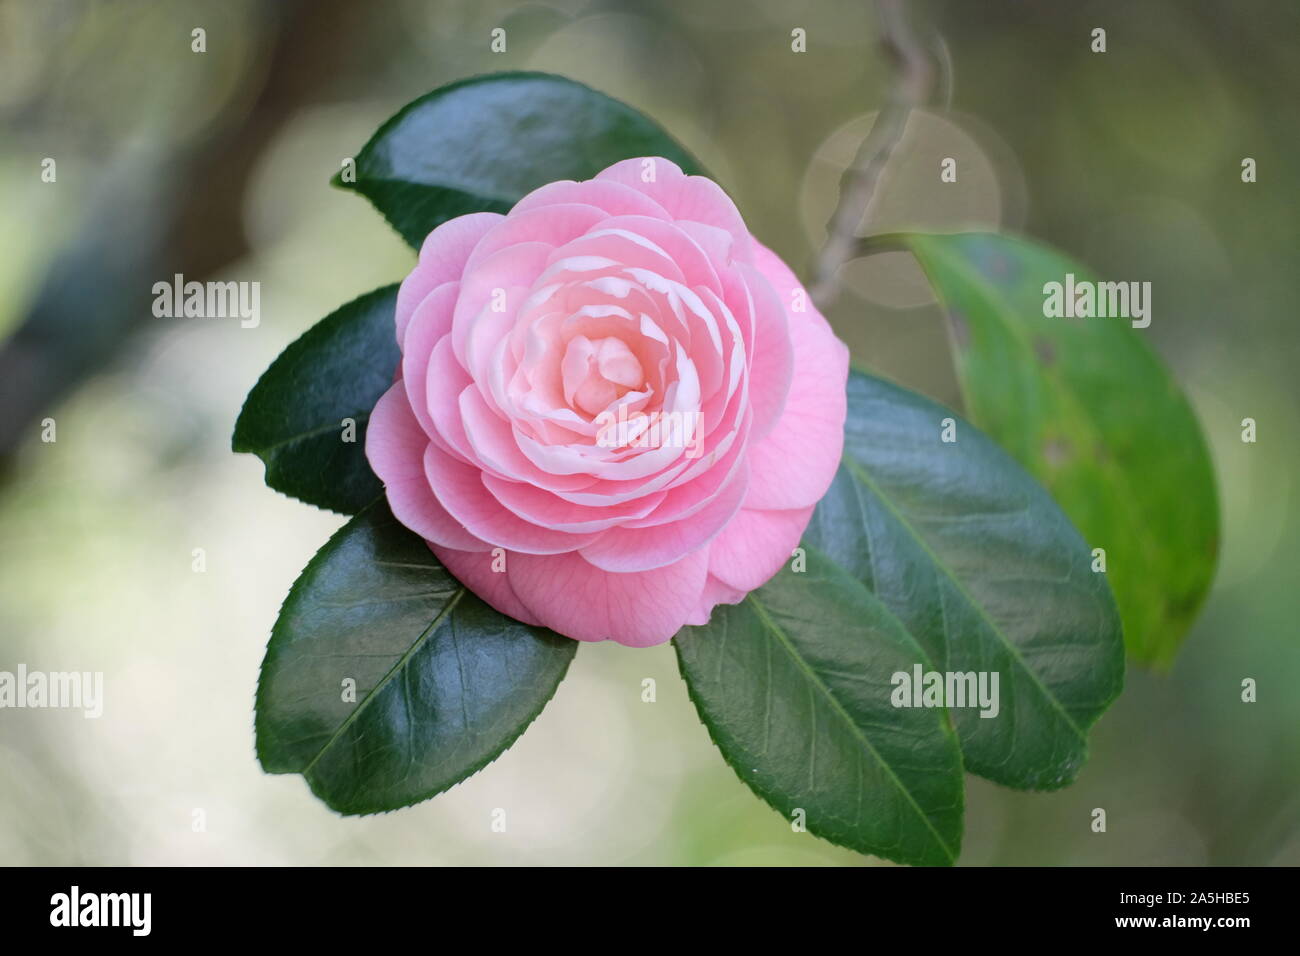 Camellia is a genus of flowering plants. They are found in eastern and southern Asia, from the Himalayas east to Japan and Indonesia. Stock Photo